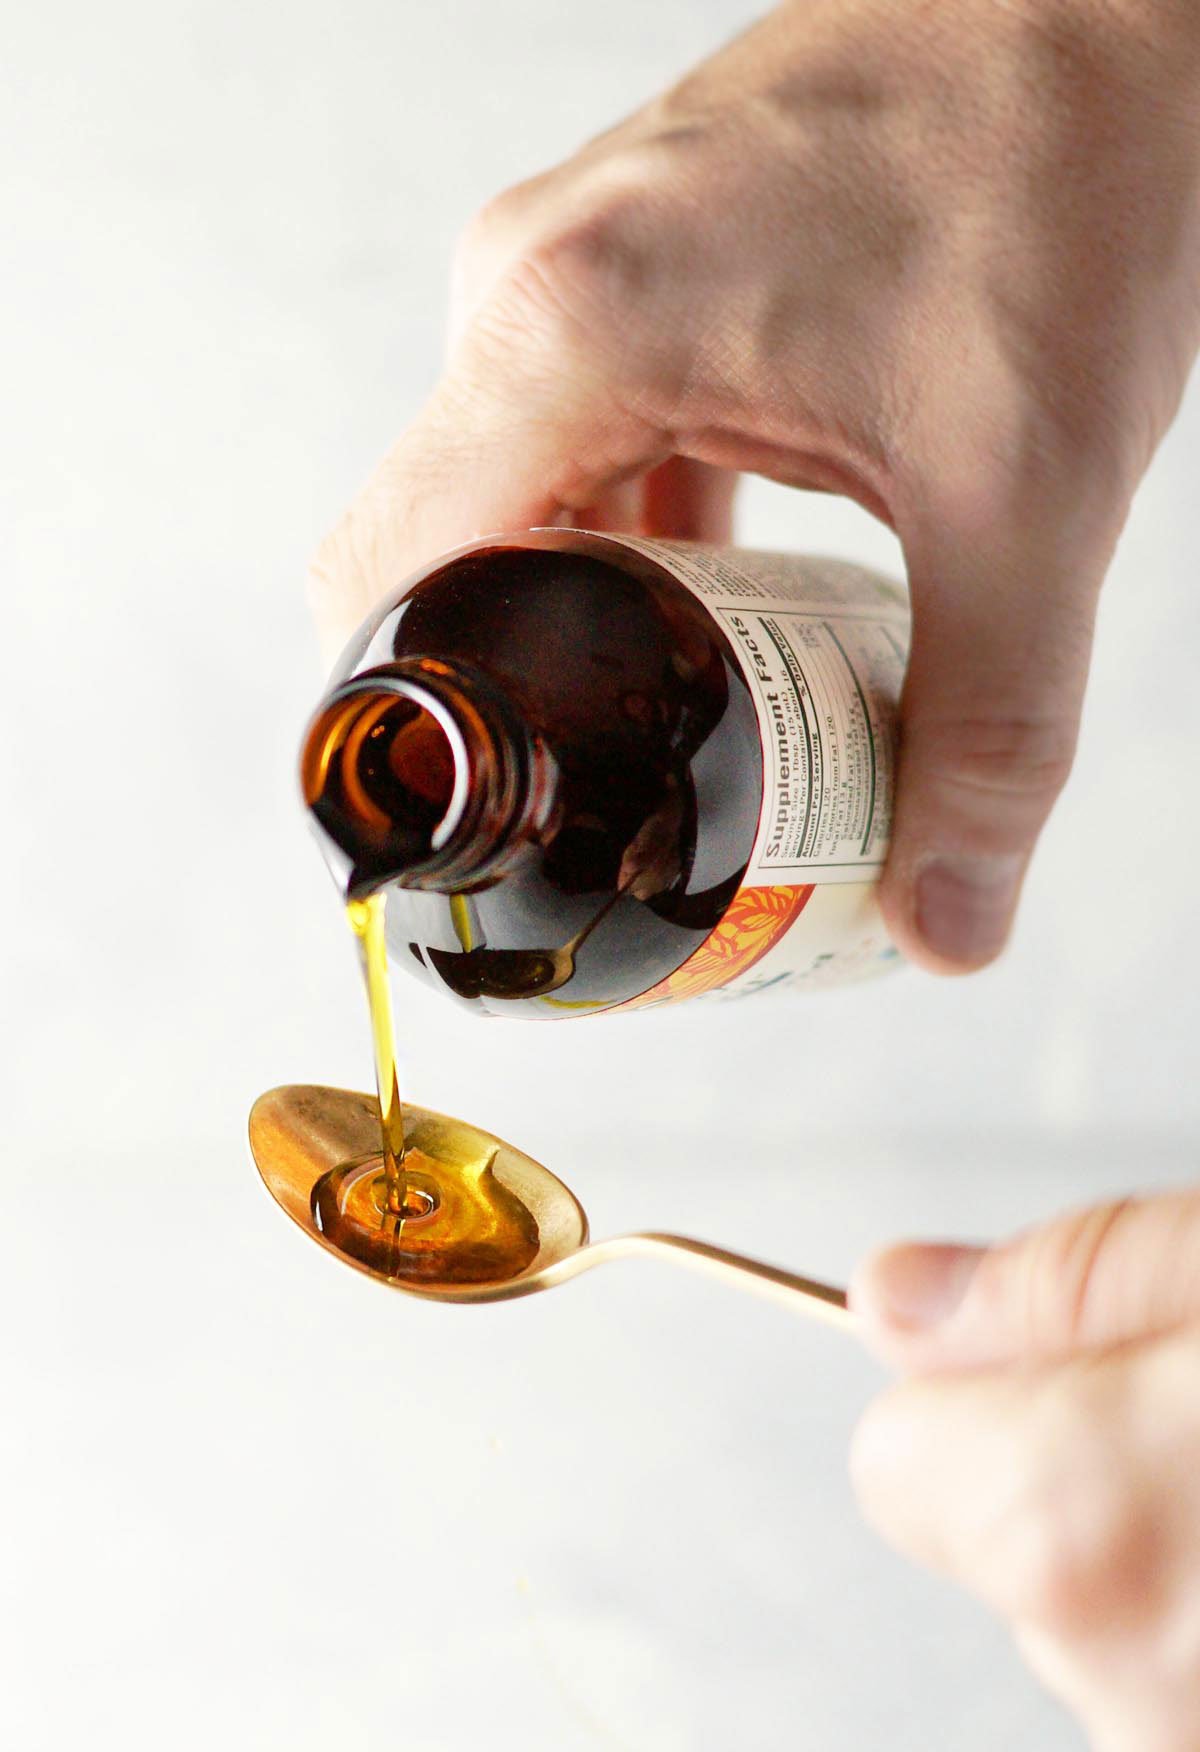 DHA oil being poured onto a spoon